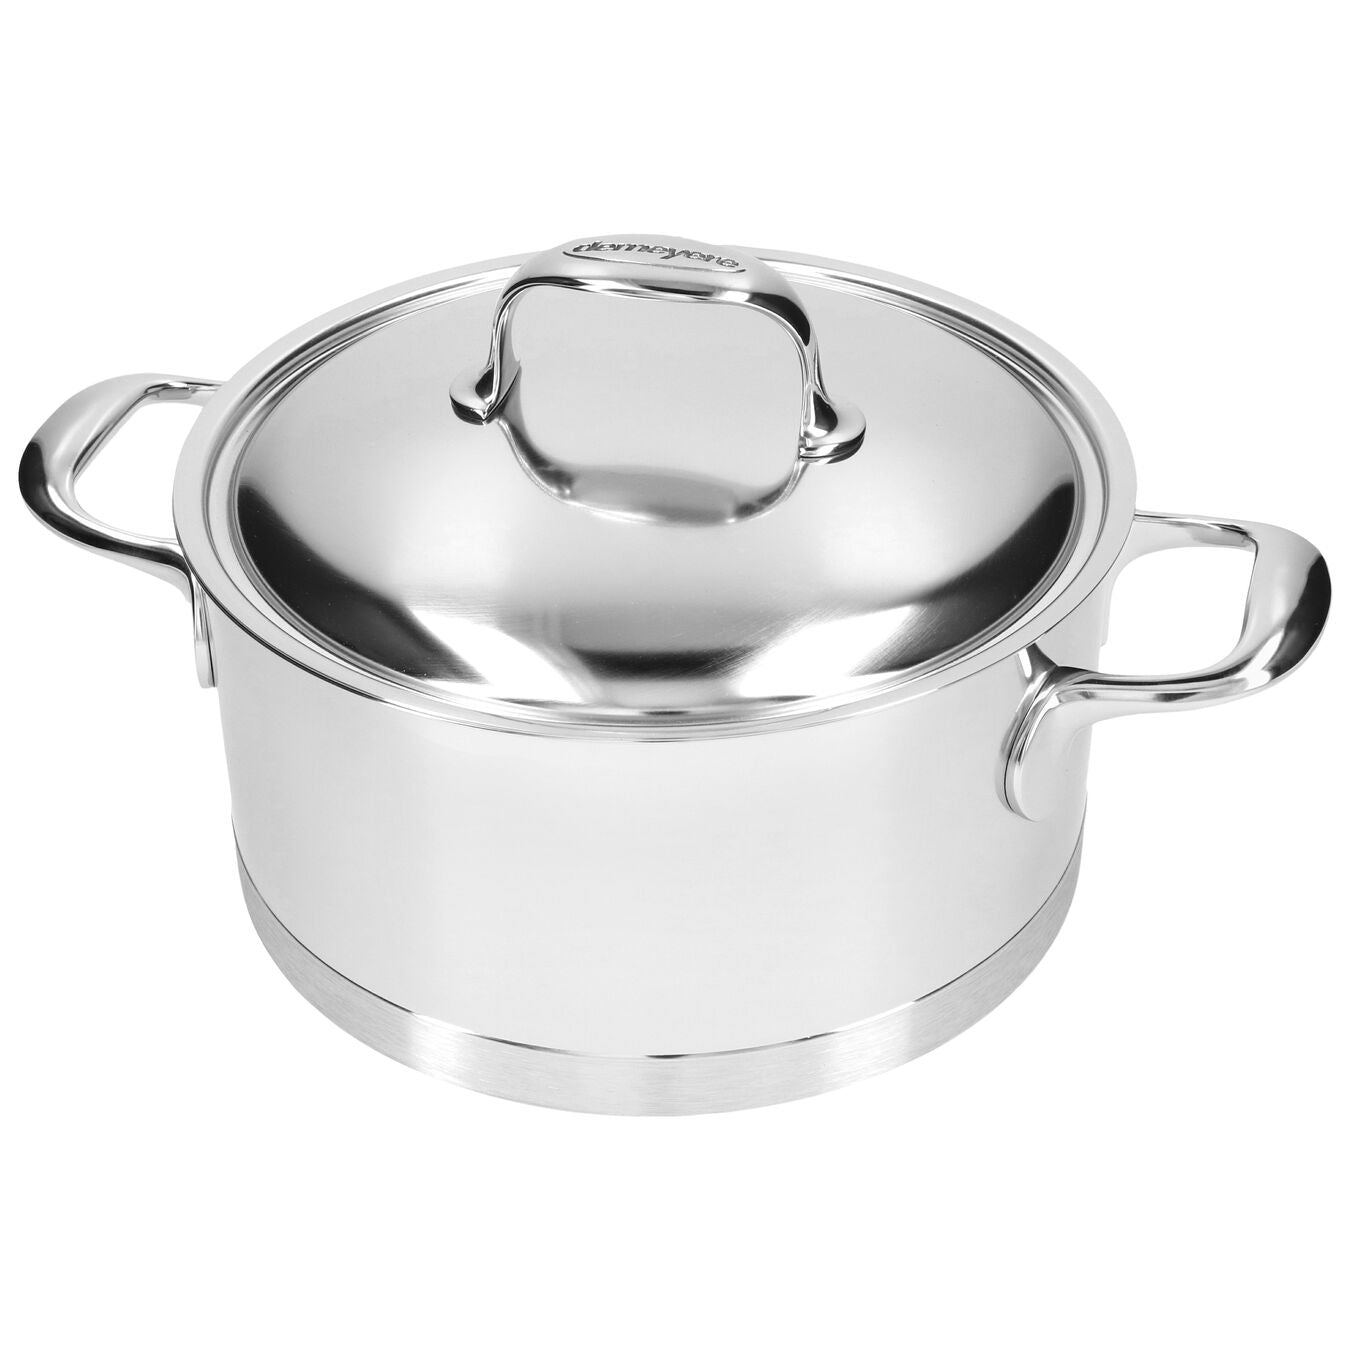 Demeyere Atlantis 7 Collection 8.4L 18/10 Stainless Steel Dutch Oven